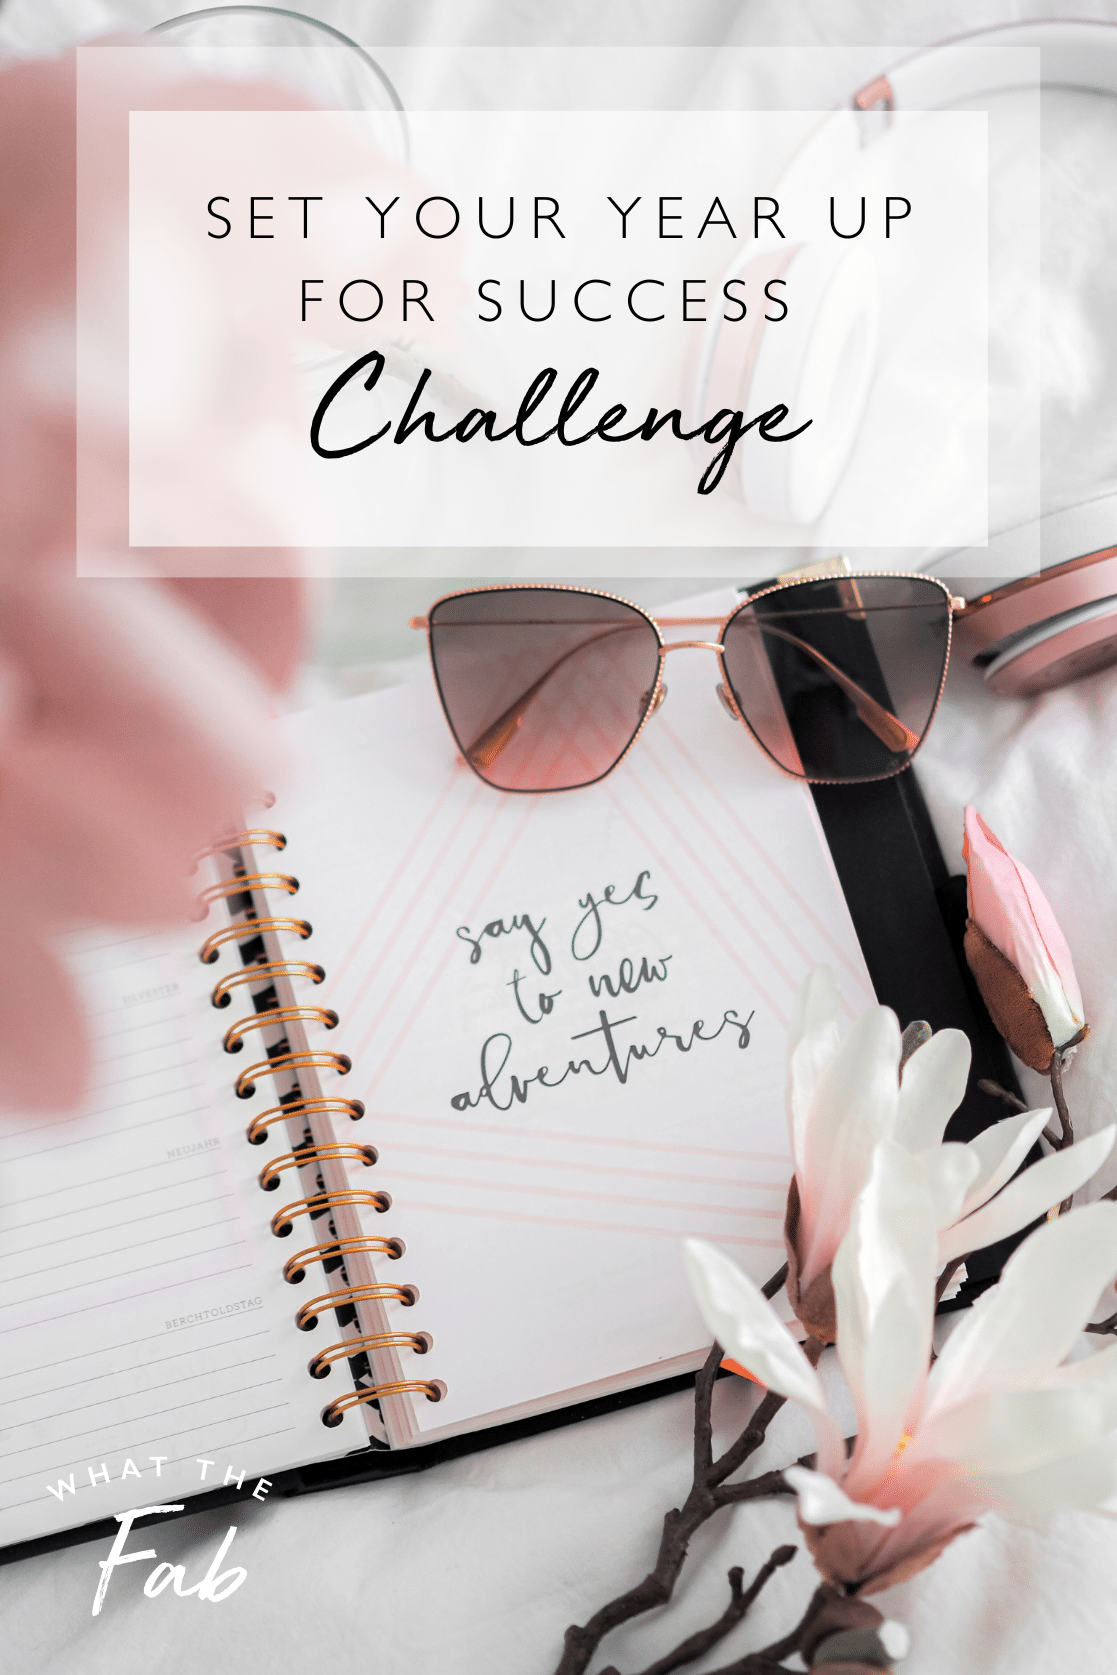 Set your year up for success email challenge say yes to new adventures notebook goalsetting